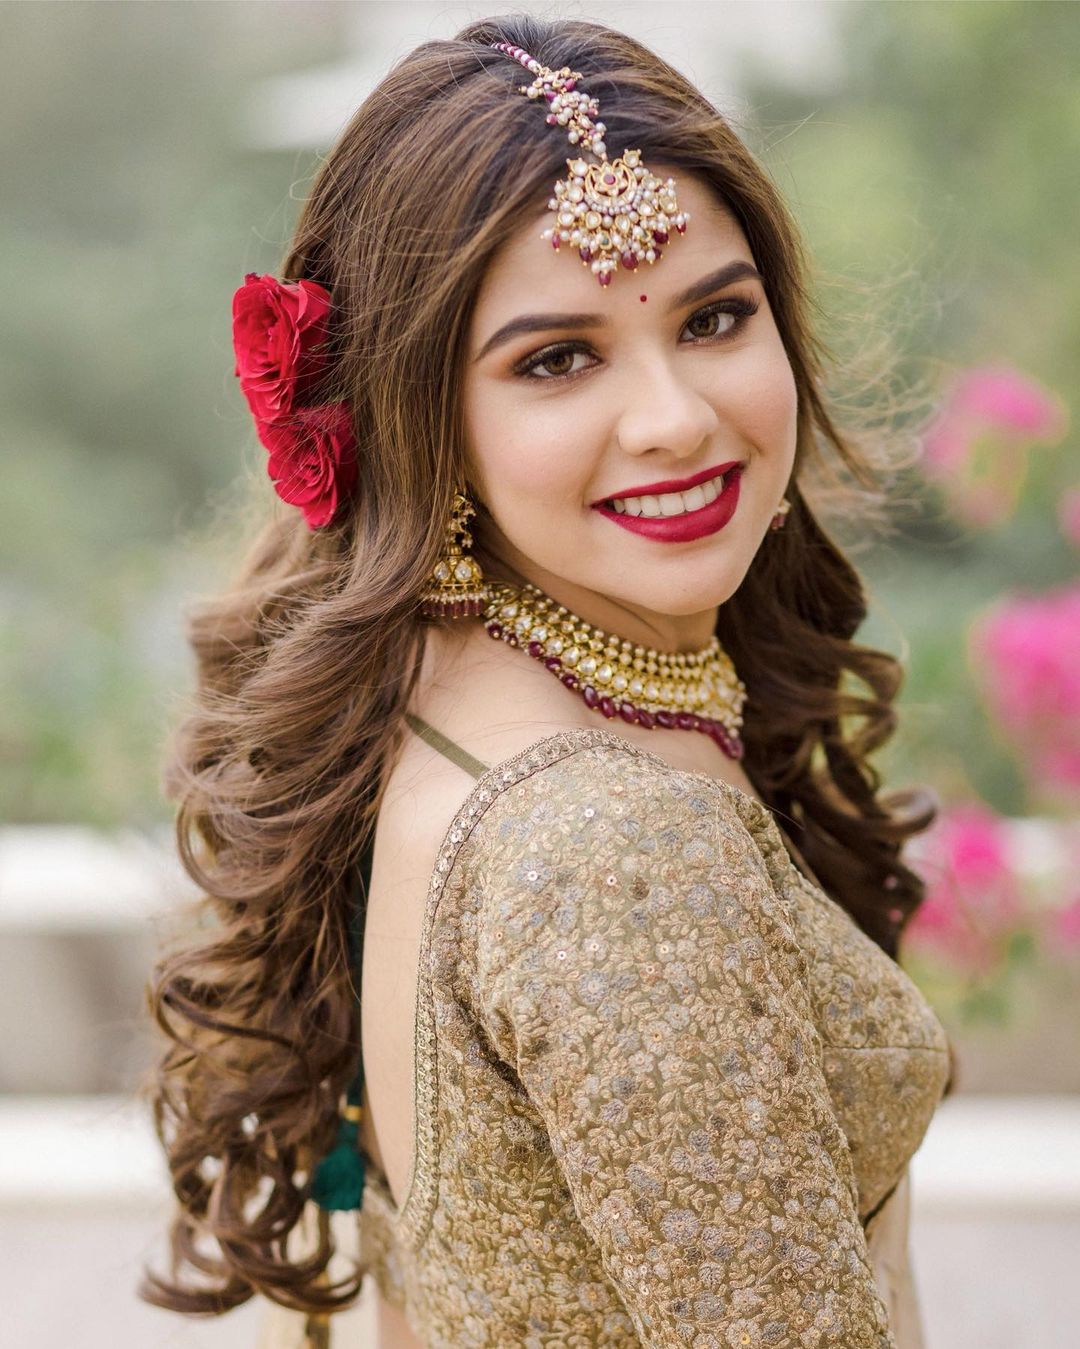 18 Popular Hairstyle For Girls For Wedding - Lifestyle Fun